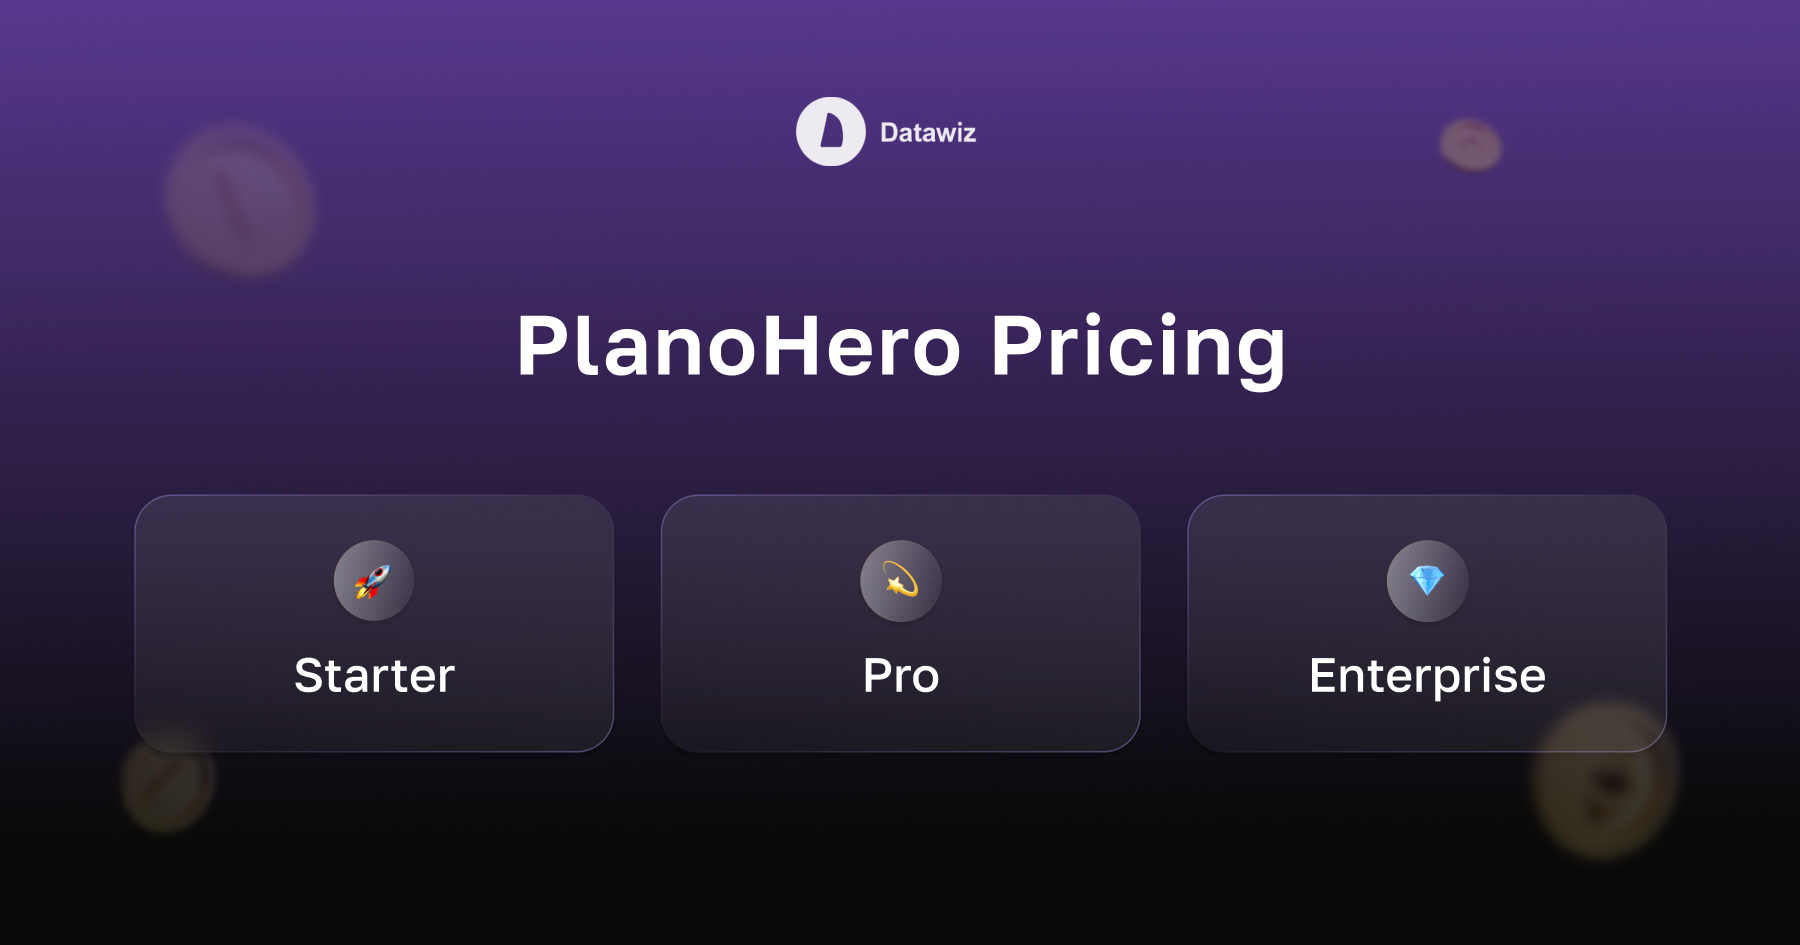 PlanoHero tariff plans. Overview of features and benefits